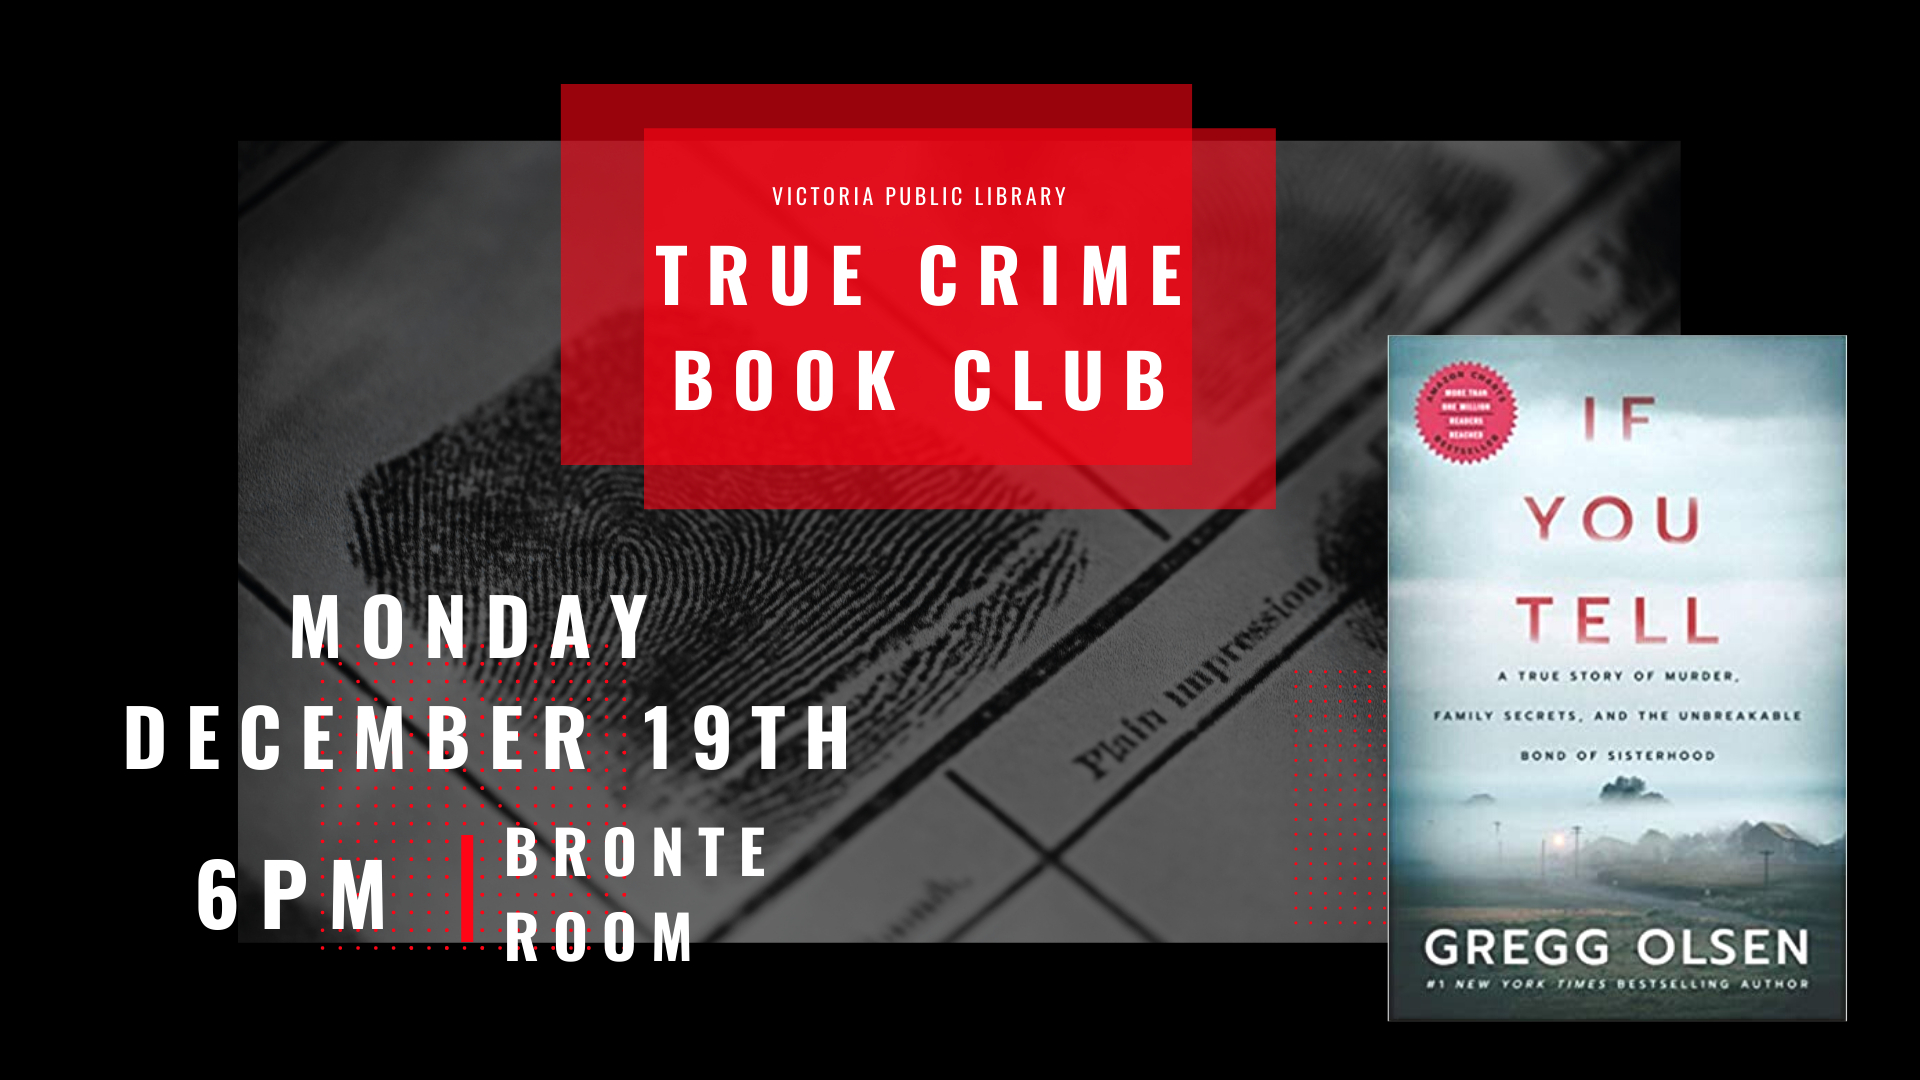 True Crime Book Club, December 19th at 6pm, If you tell by Gregg Olsen